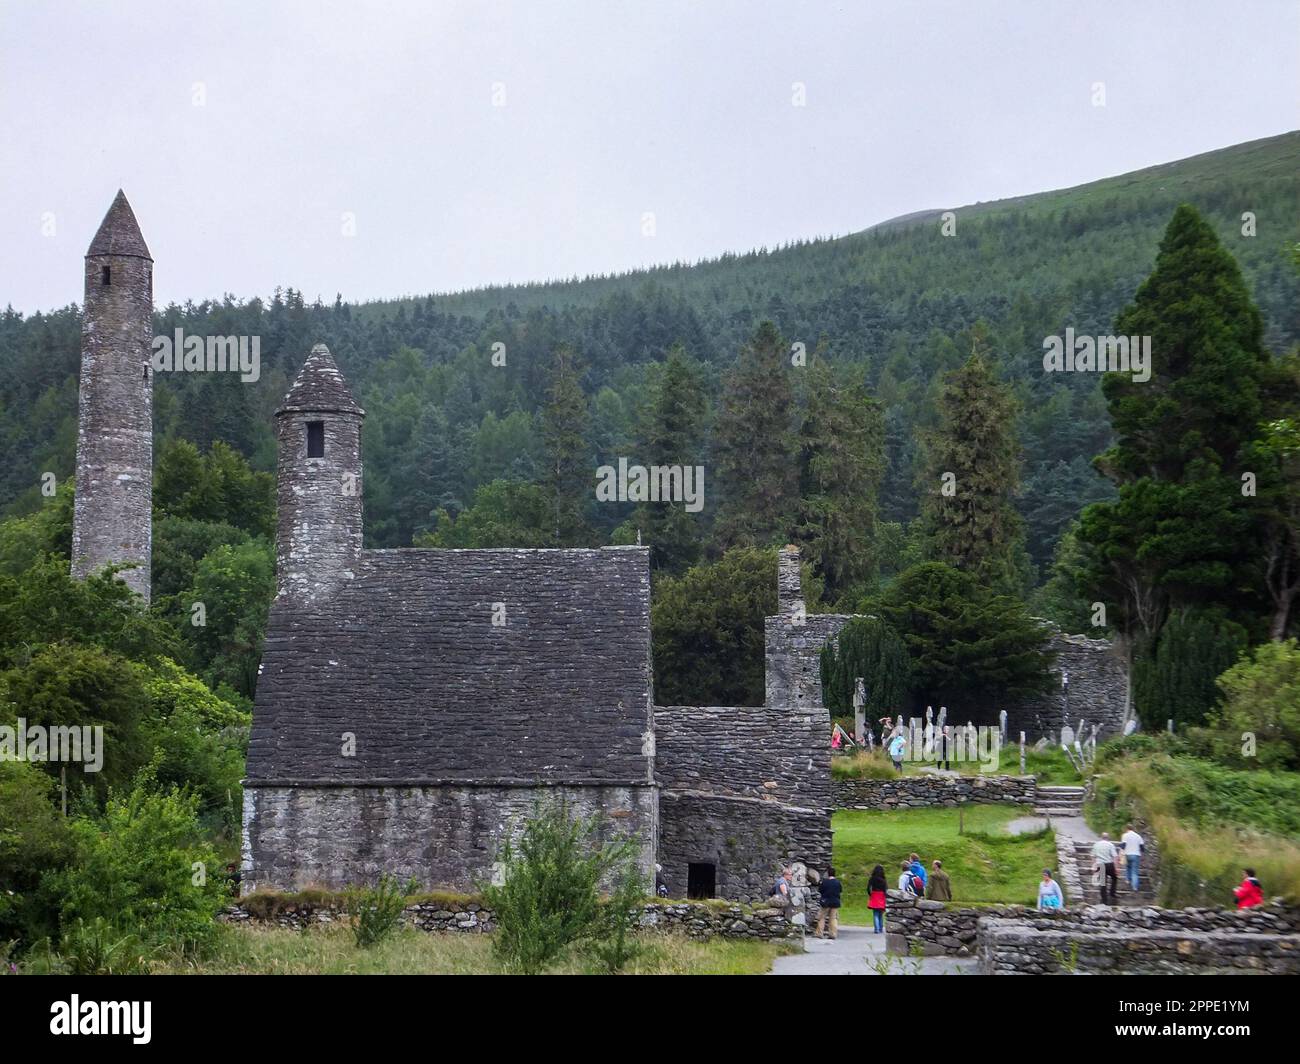 The ancient ruins of the Glendalough Monastic City, including the Round Tower and Saint Kevin's Kitchen, in Wicklow Mountains National Park, Ireland. Stock Photo